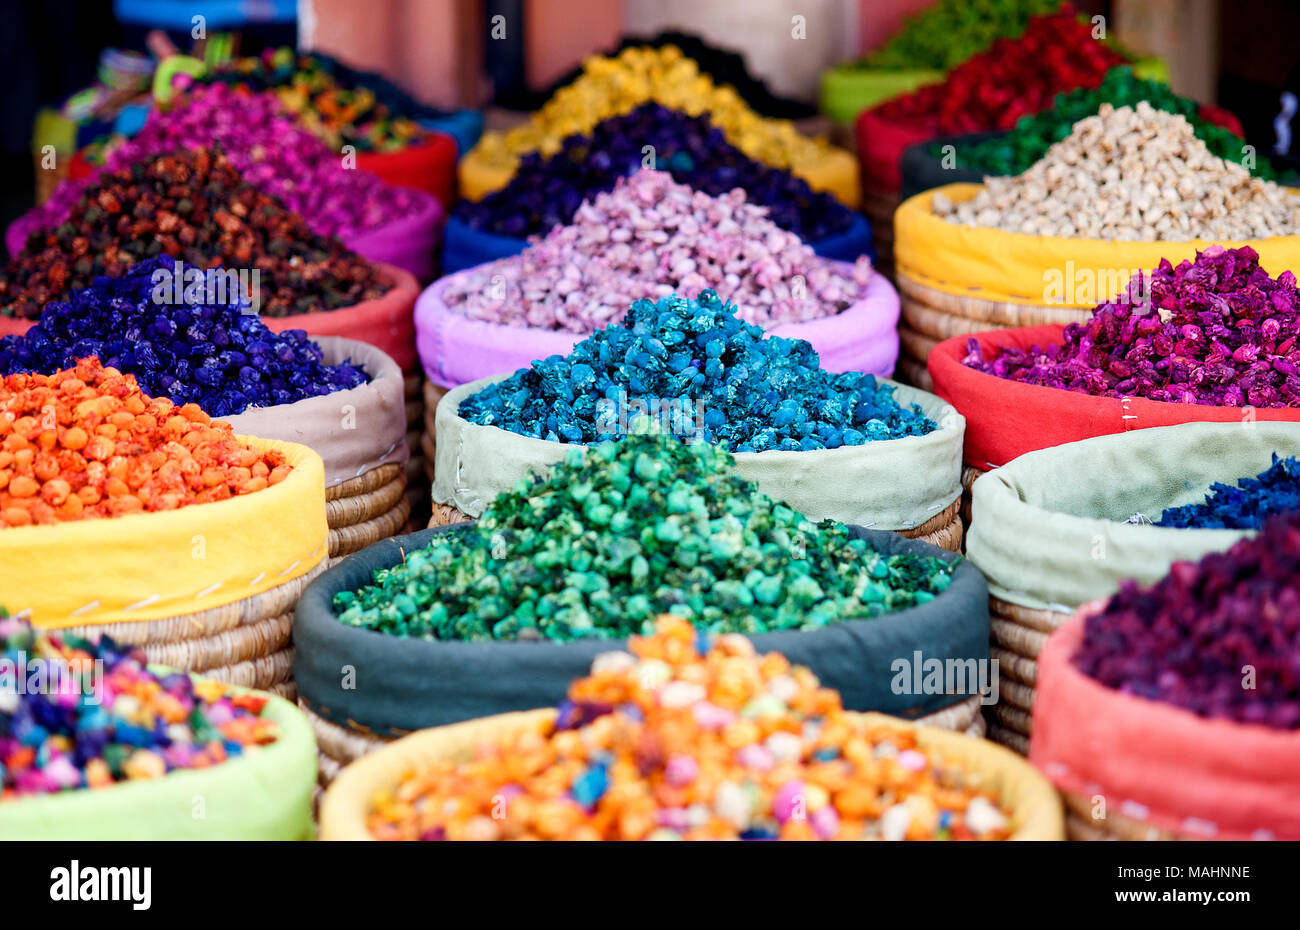 Multicolored dried flowers, used for soaps and perfumes as well as coloring, dyes and as an ingredient in foods, on sale in the souks of Marrakesh's m Stock Photo